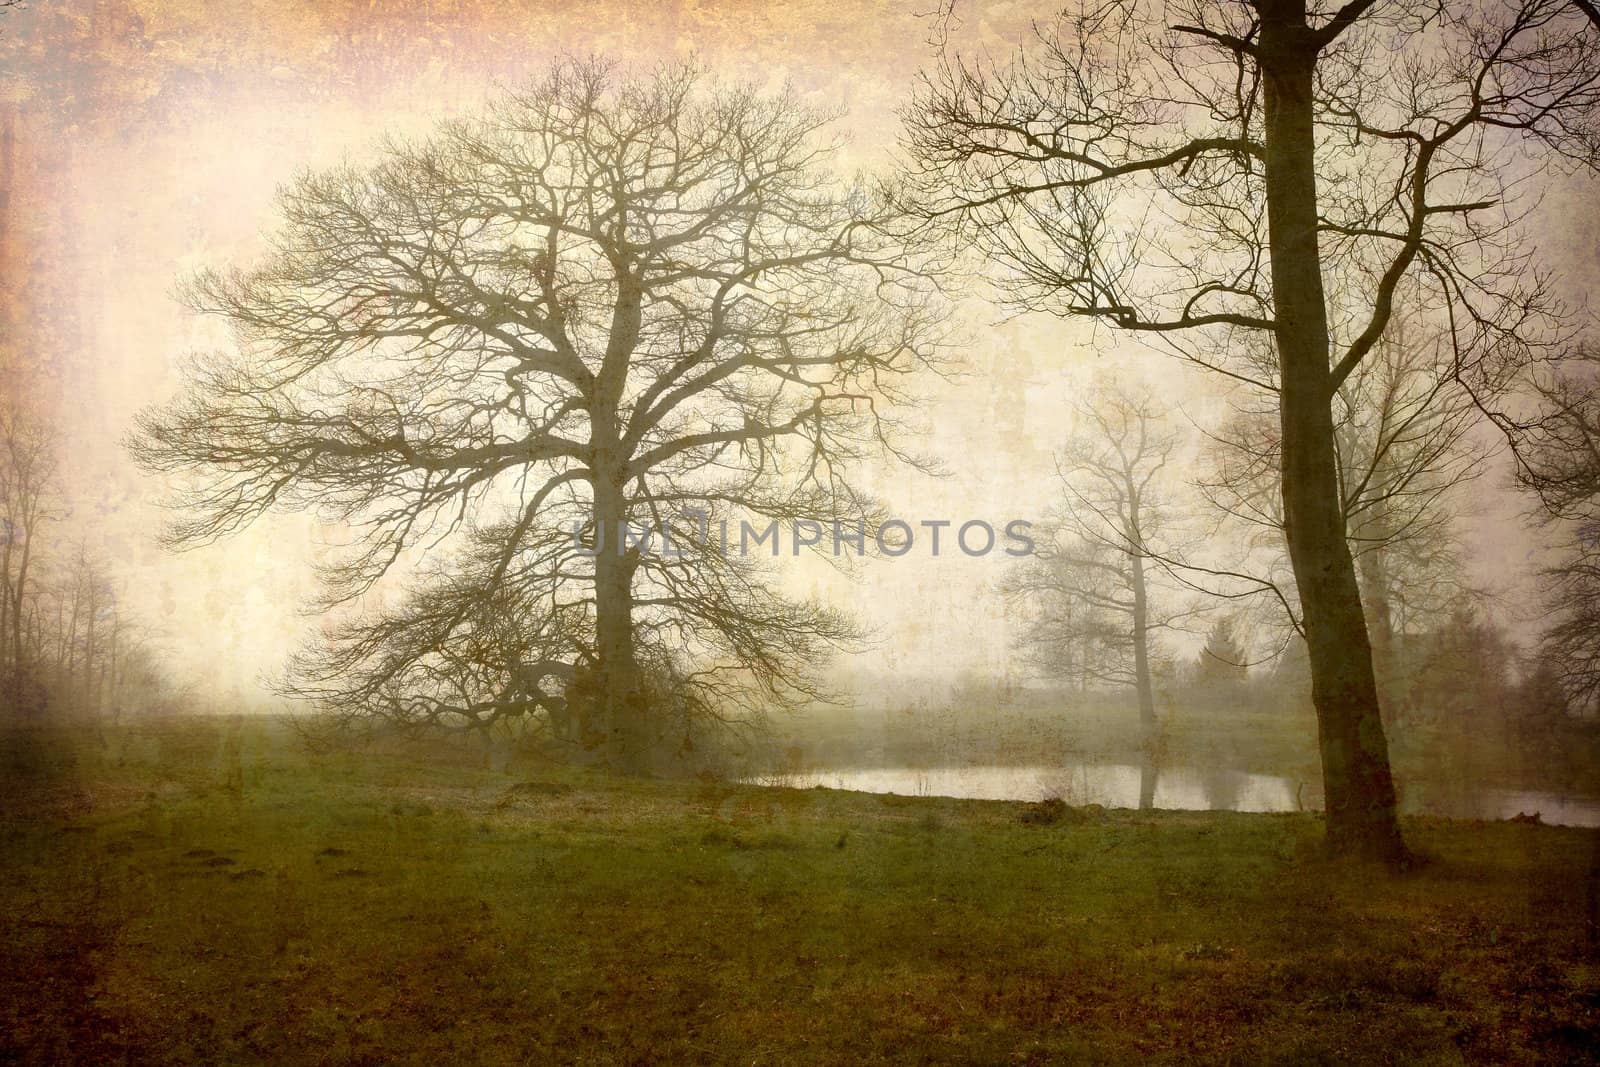 Artistic work of my own in retro style - Postcard from Denmark. - Misty winter morning. More of my images worked together to reflect age and time.